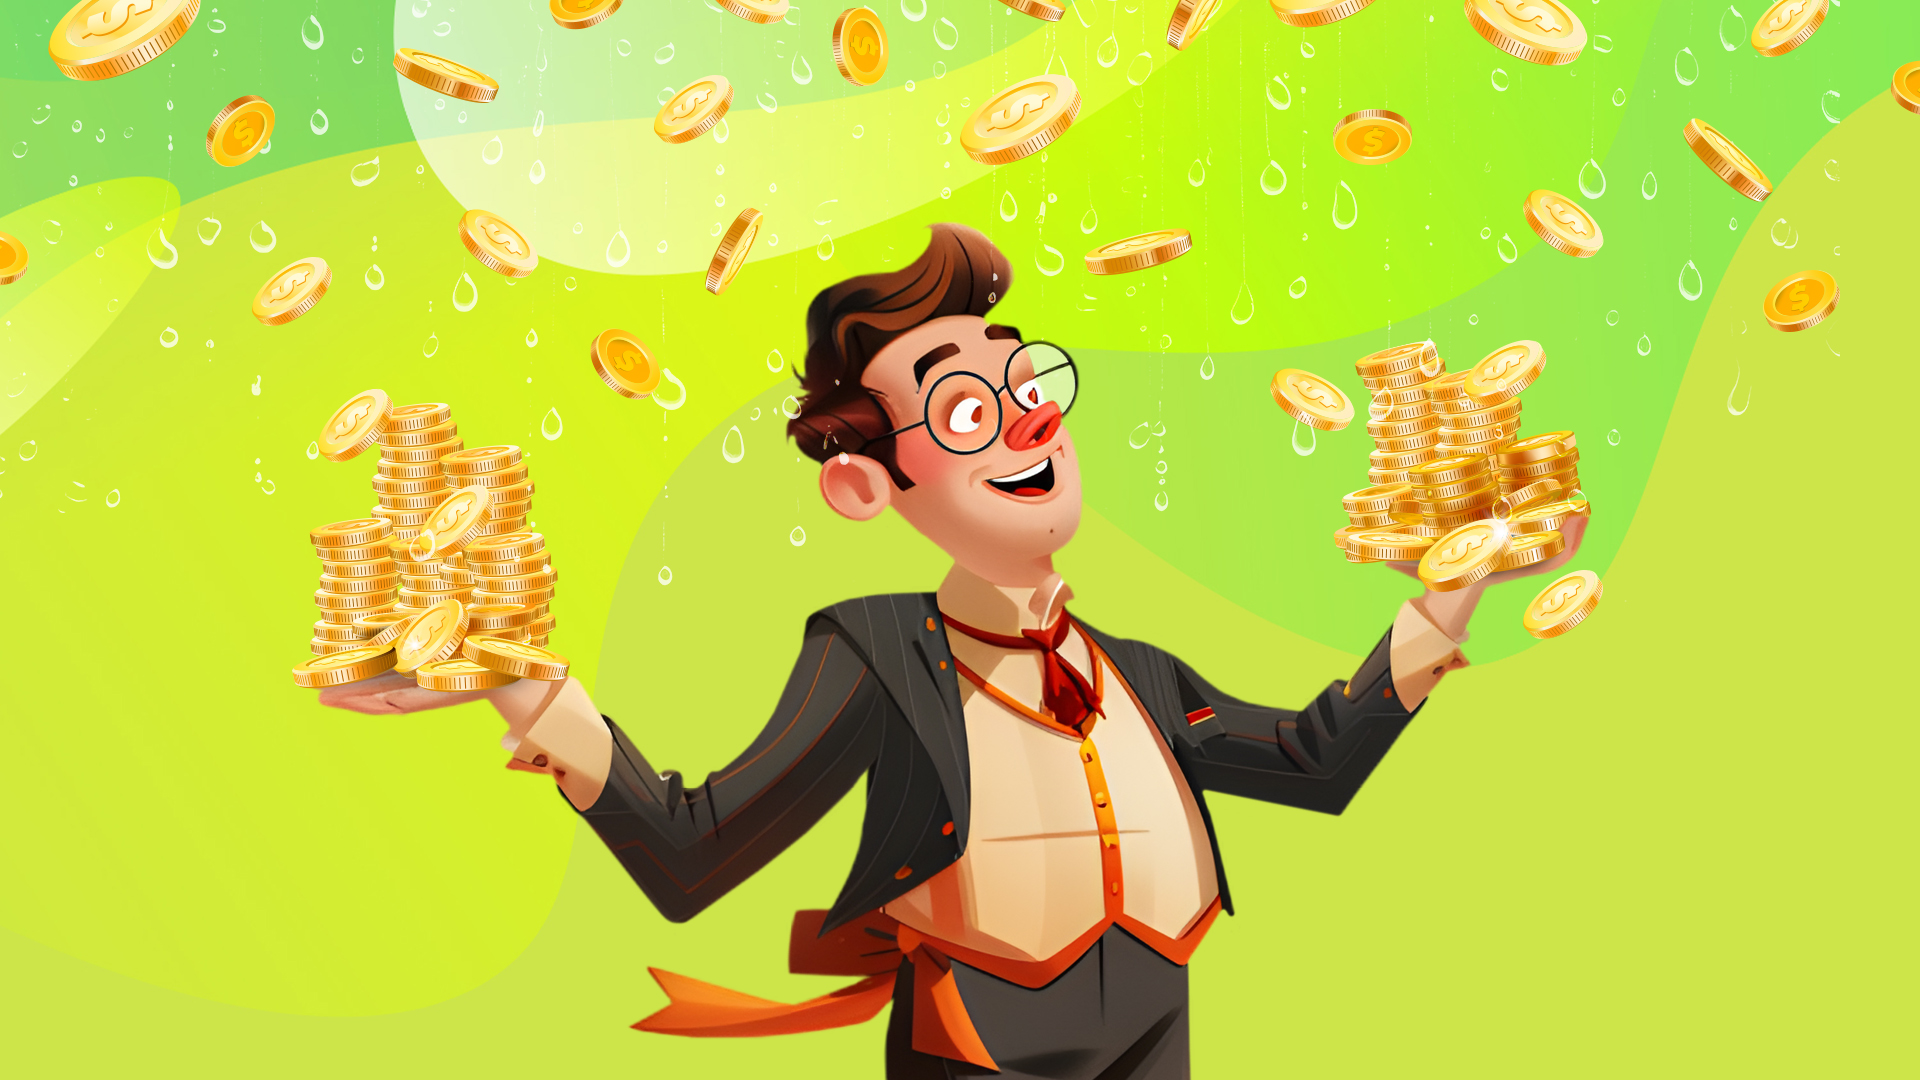 Man with glasses holds stacks of gold coins in each hand and some float around his head, all against a bright green background.